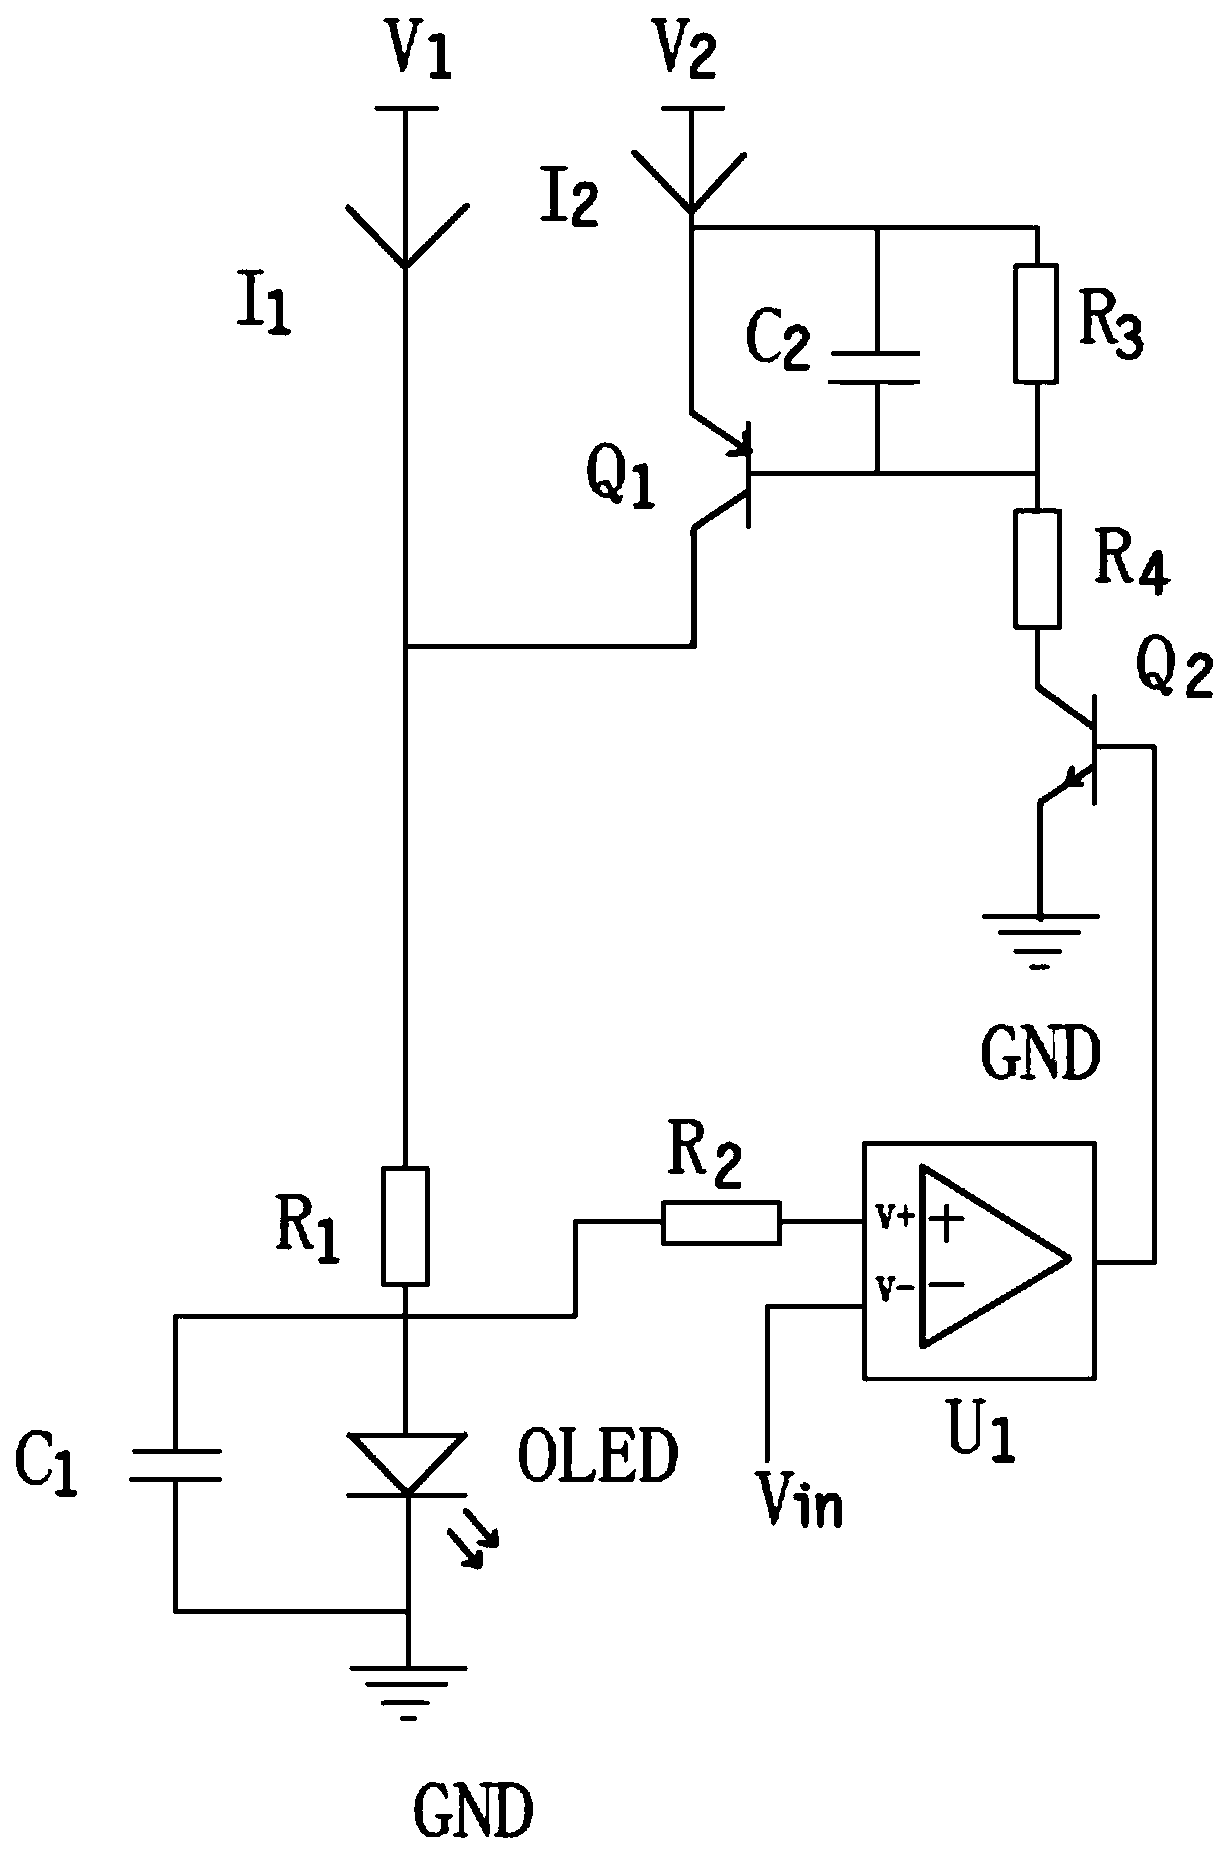 An oled screen drive circuit with a fuse type anti-short circuit structure